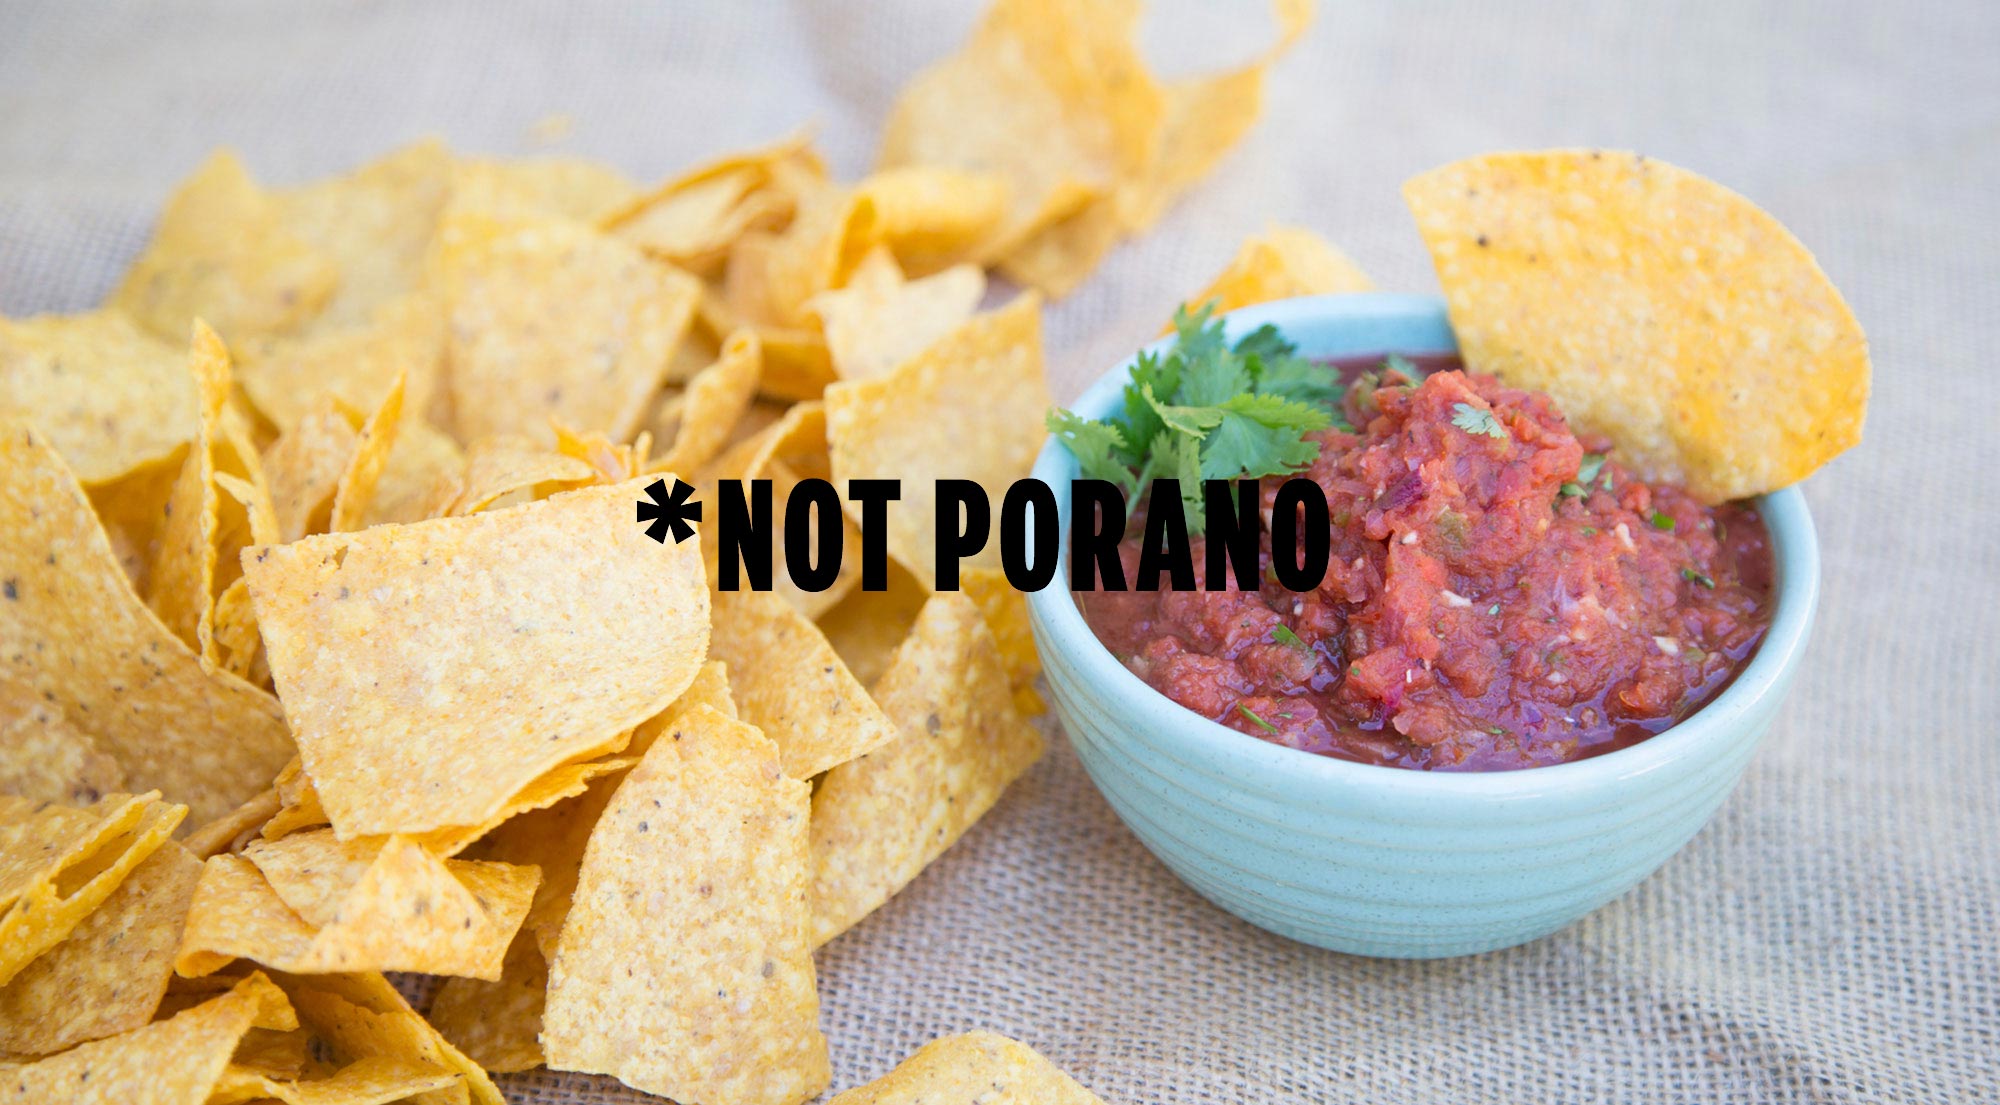 Photo of chips and salsa - Not Porano Pasta